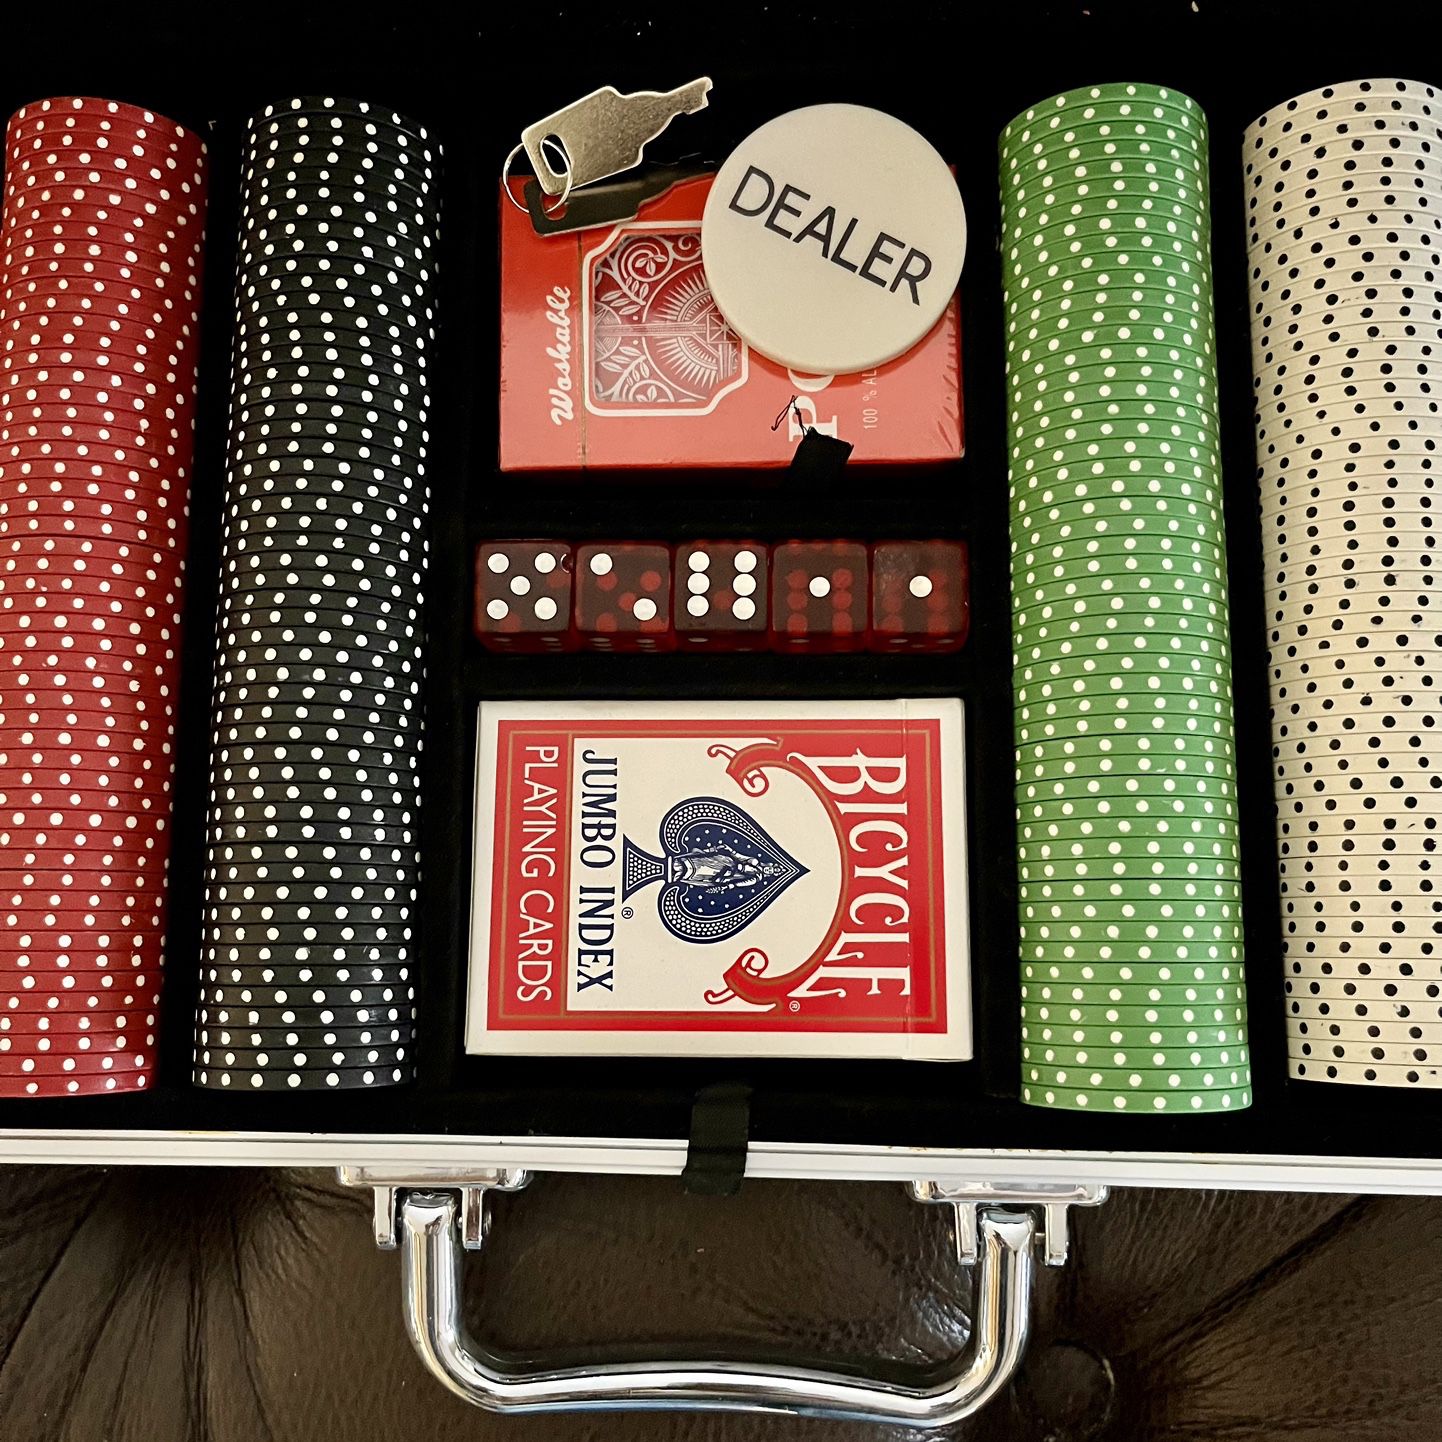 Brand New Poker Set! Never Been Used